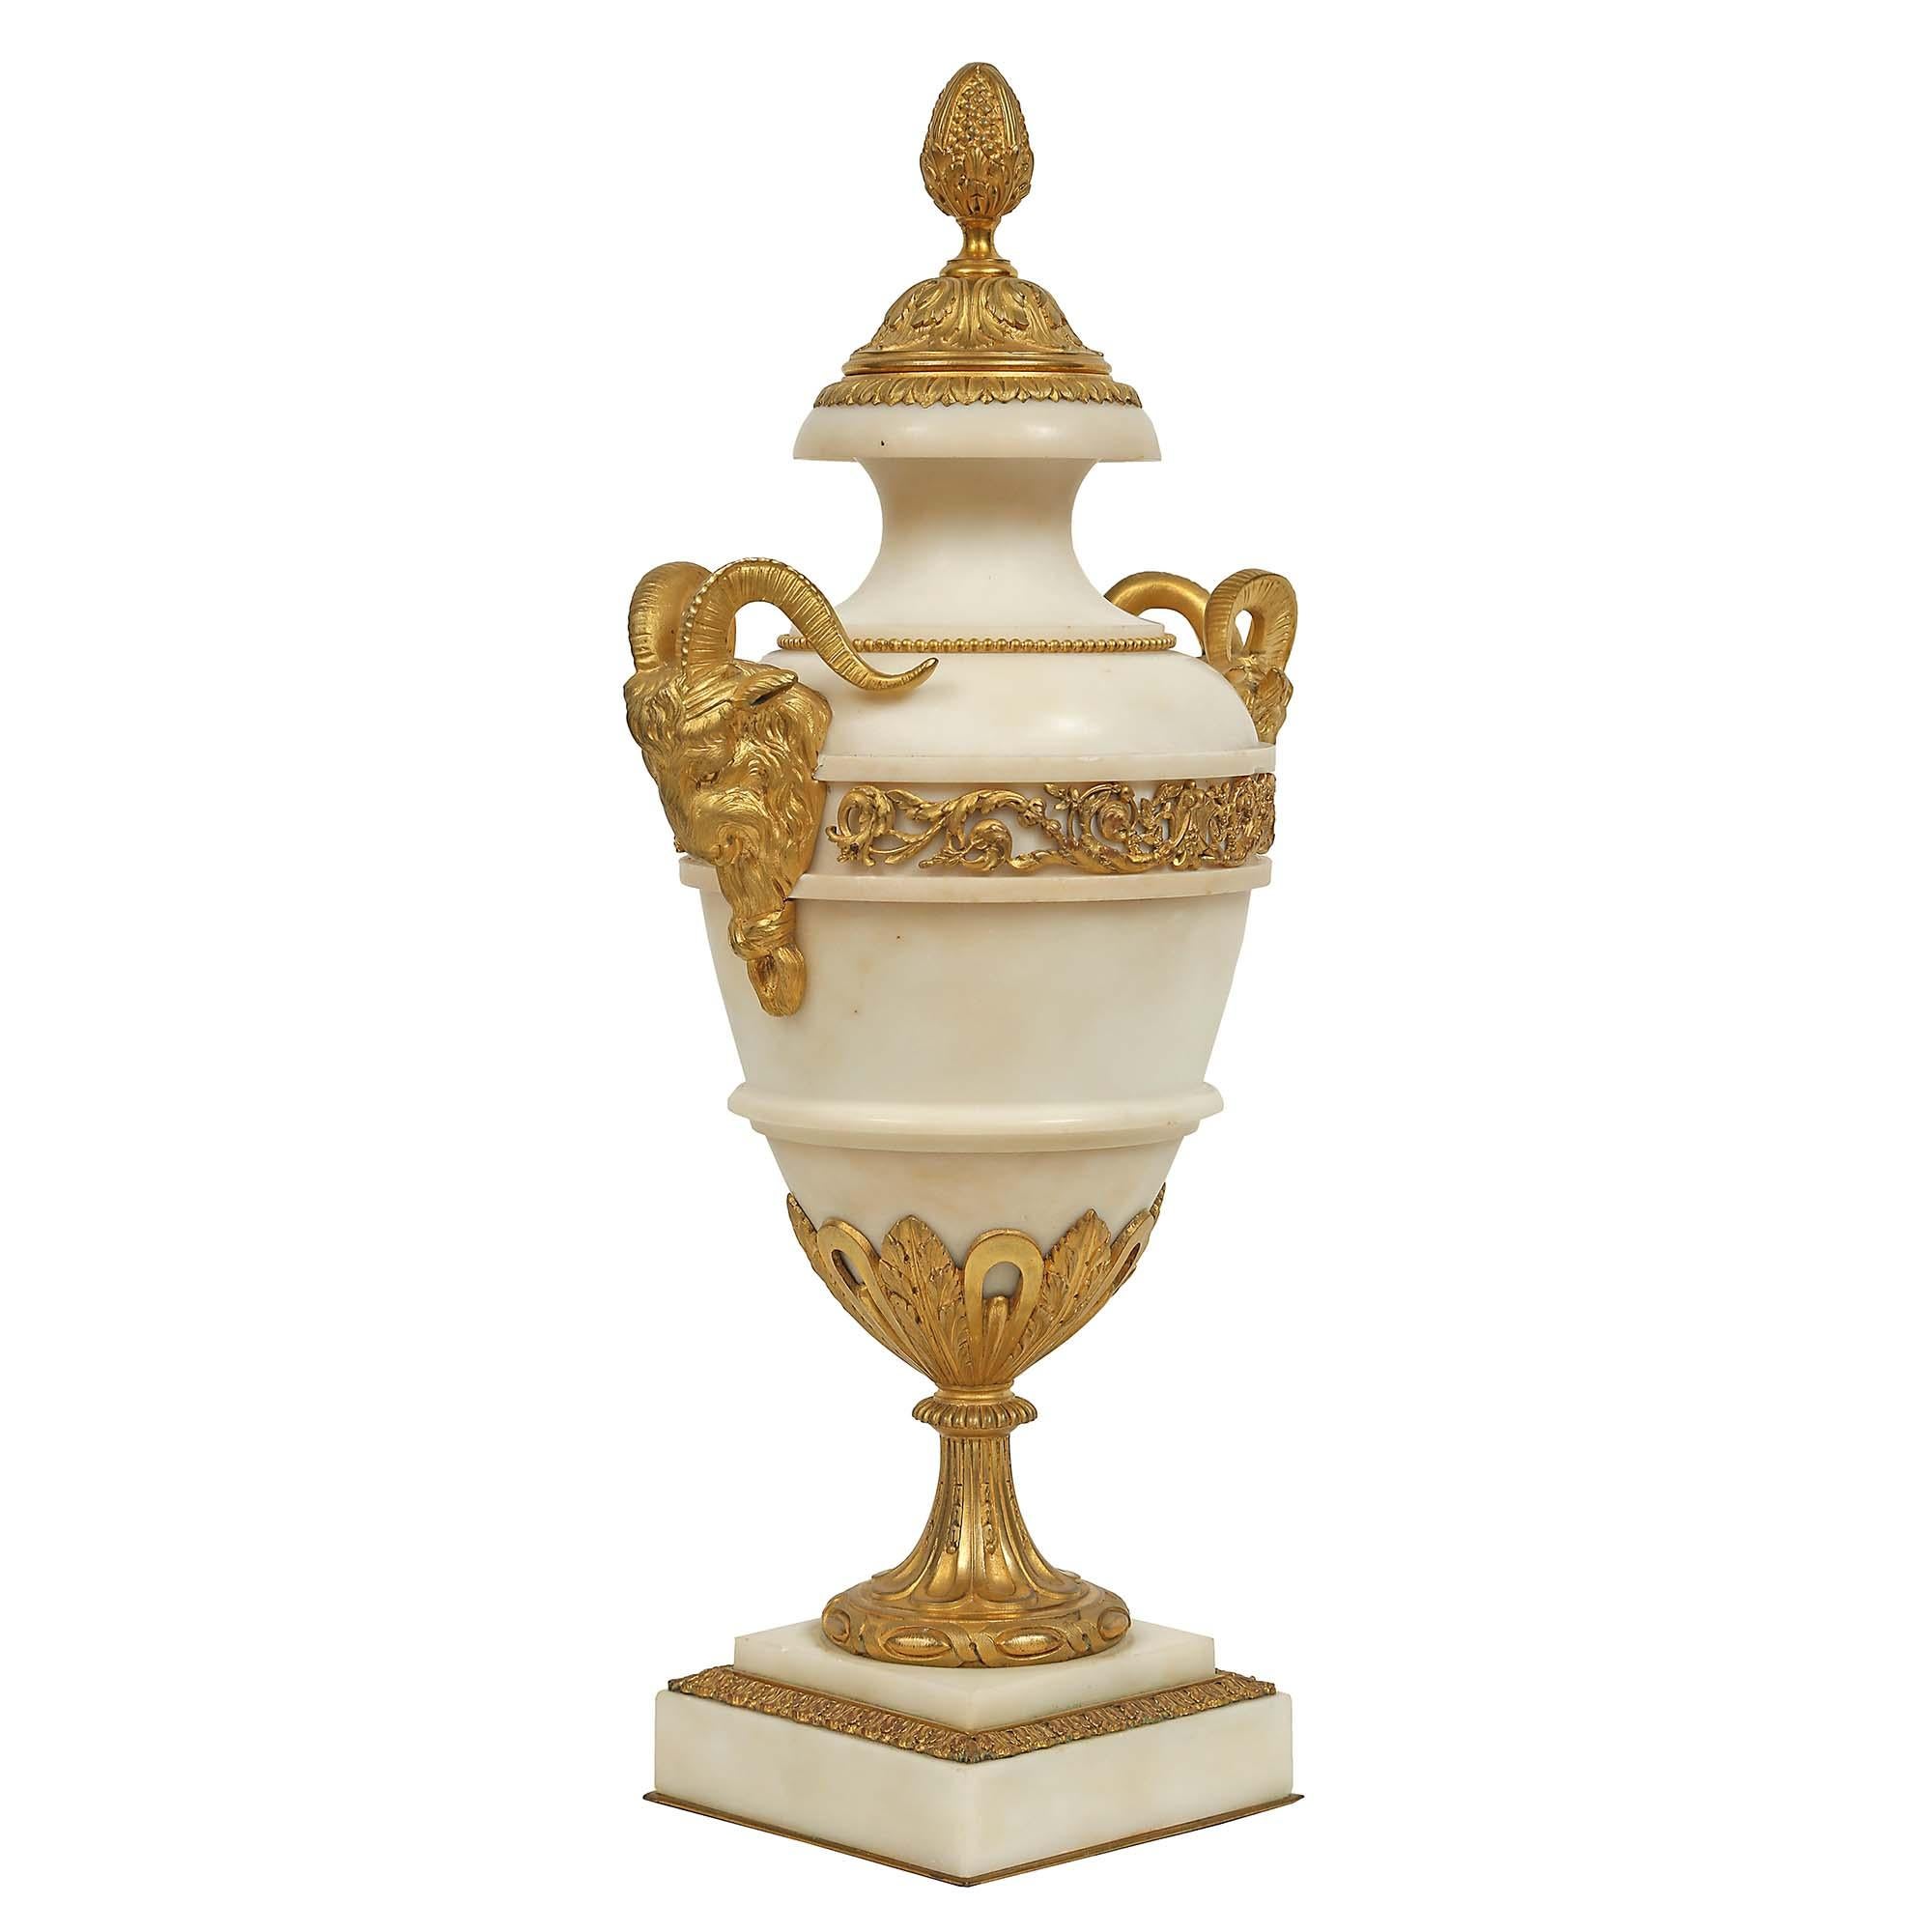 A pair of impressive and large scale, French 19th century Louis XVI st. white Carrara marble and ormolu cassolettes. the urns are raised by a thick stepped marble plinth decorated by an exquisite ormolu acorn leaf designed border. Above is a very